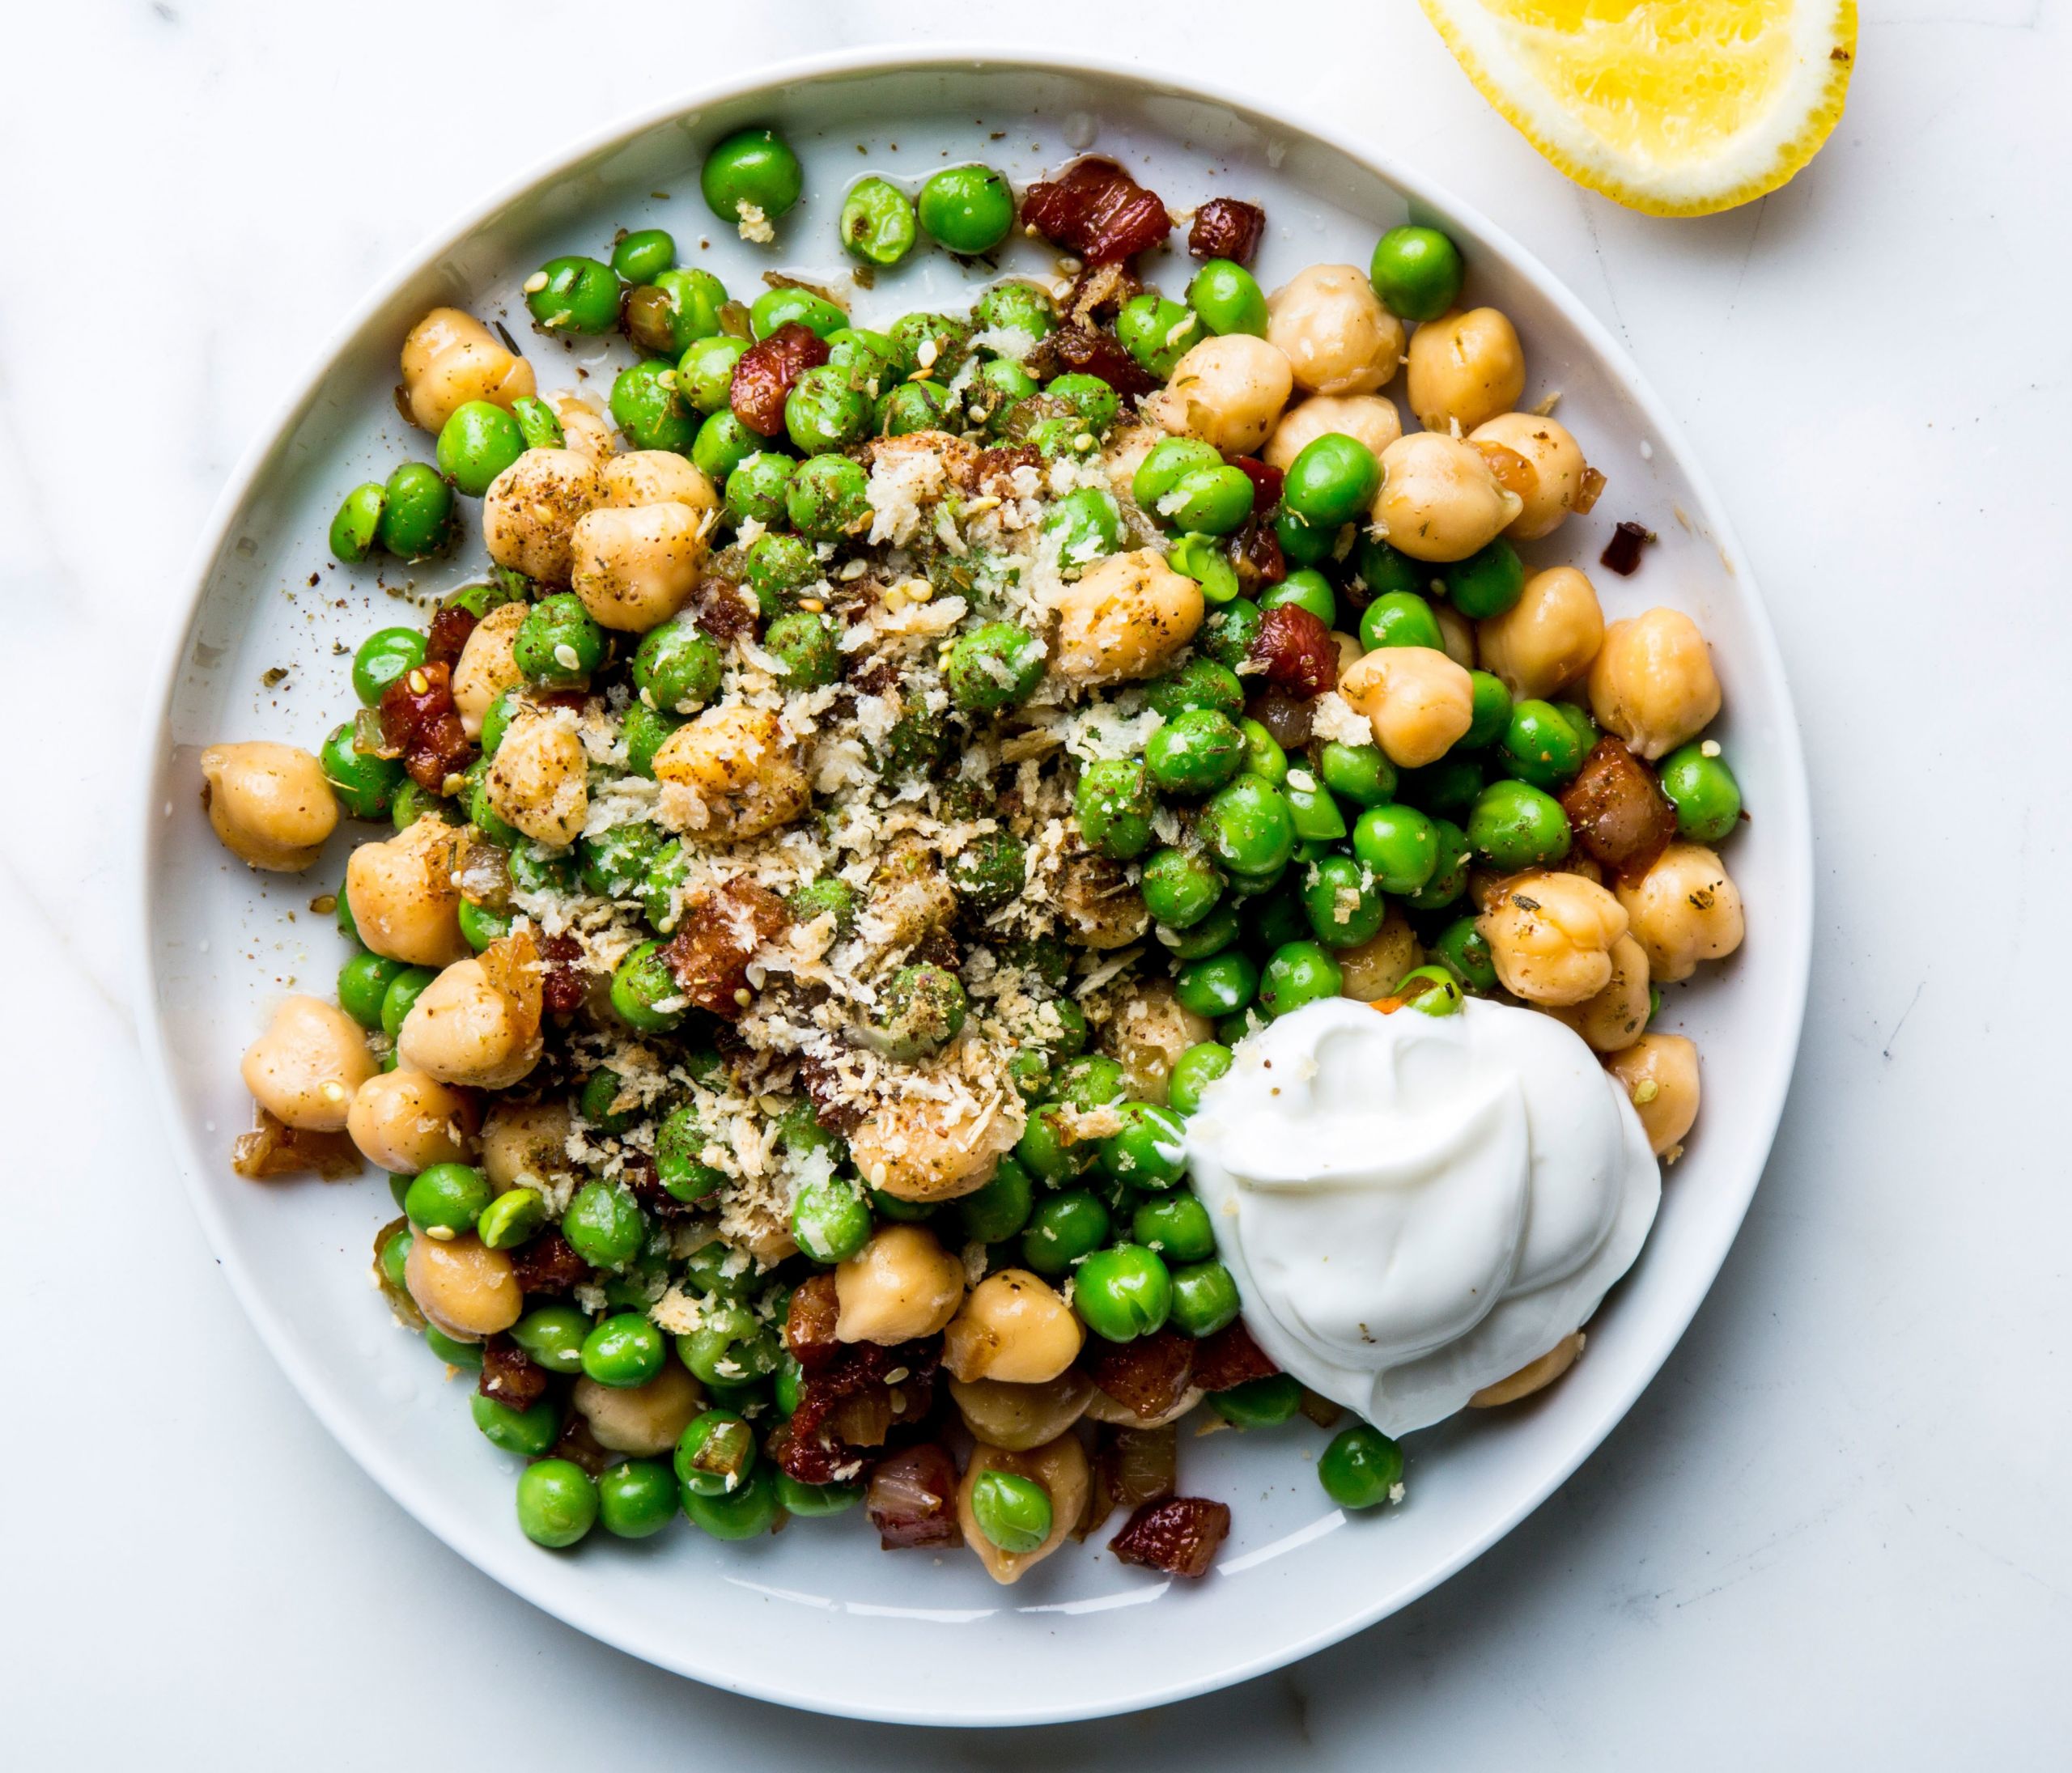 Chickpea Dinner Recipes
 A 5 Minute Chickpea Dinner Best Eaten the Couch by the TV